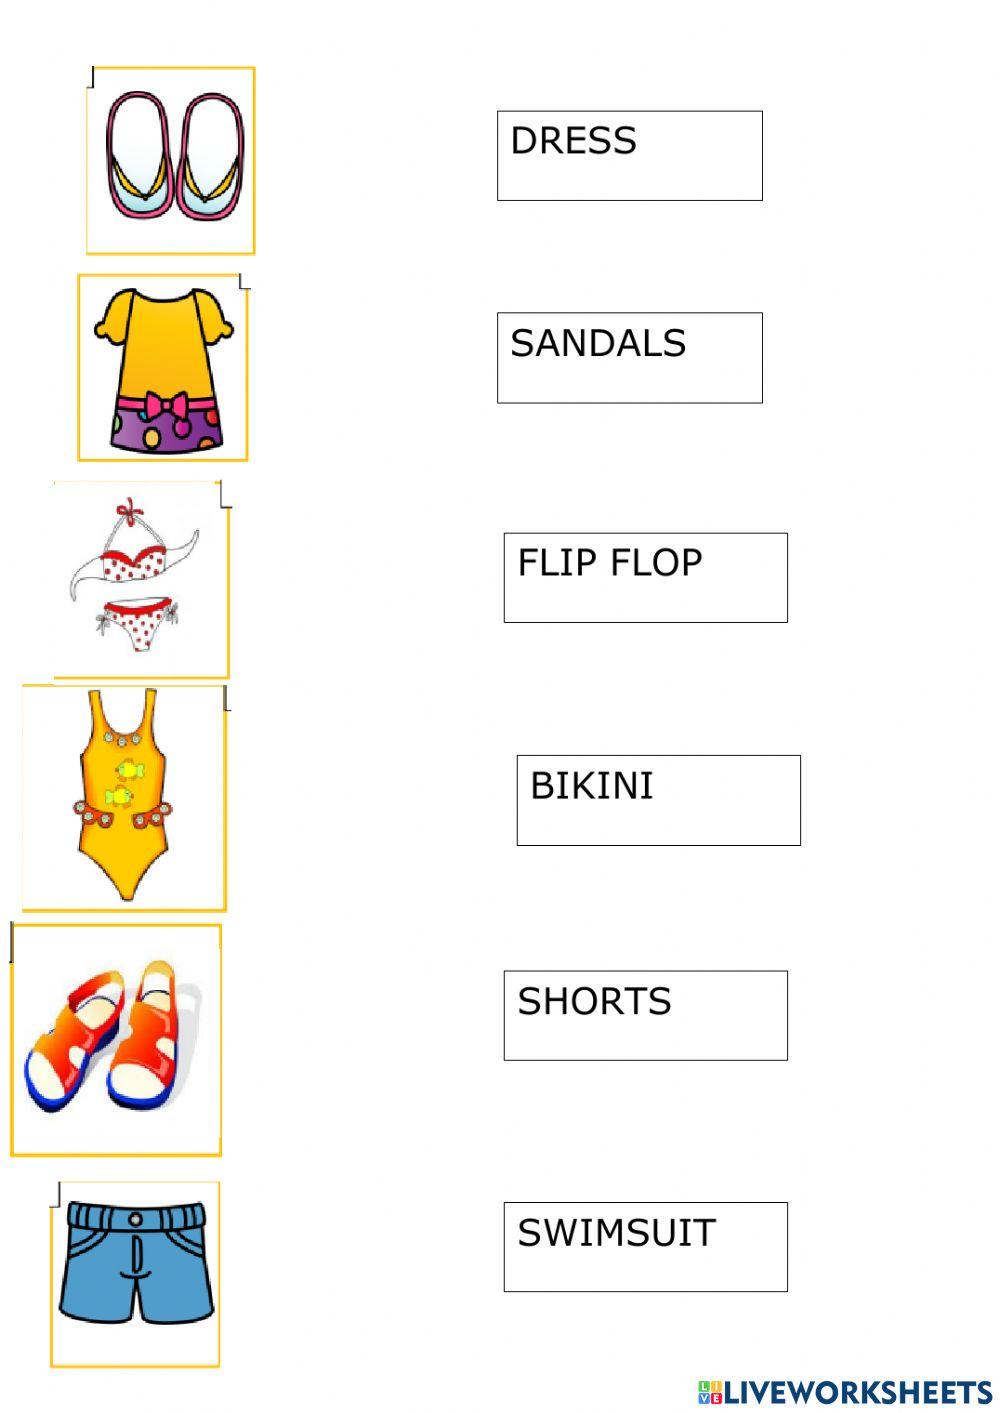 Pdf online exercise: Summer clothes